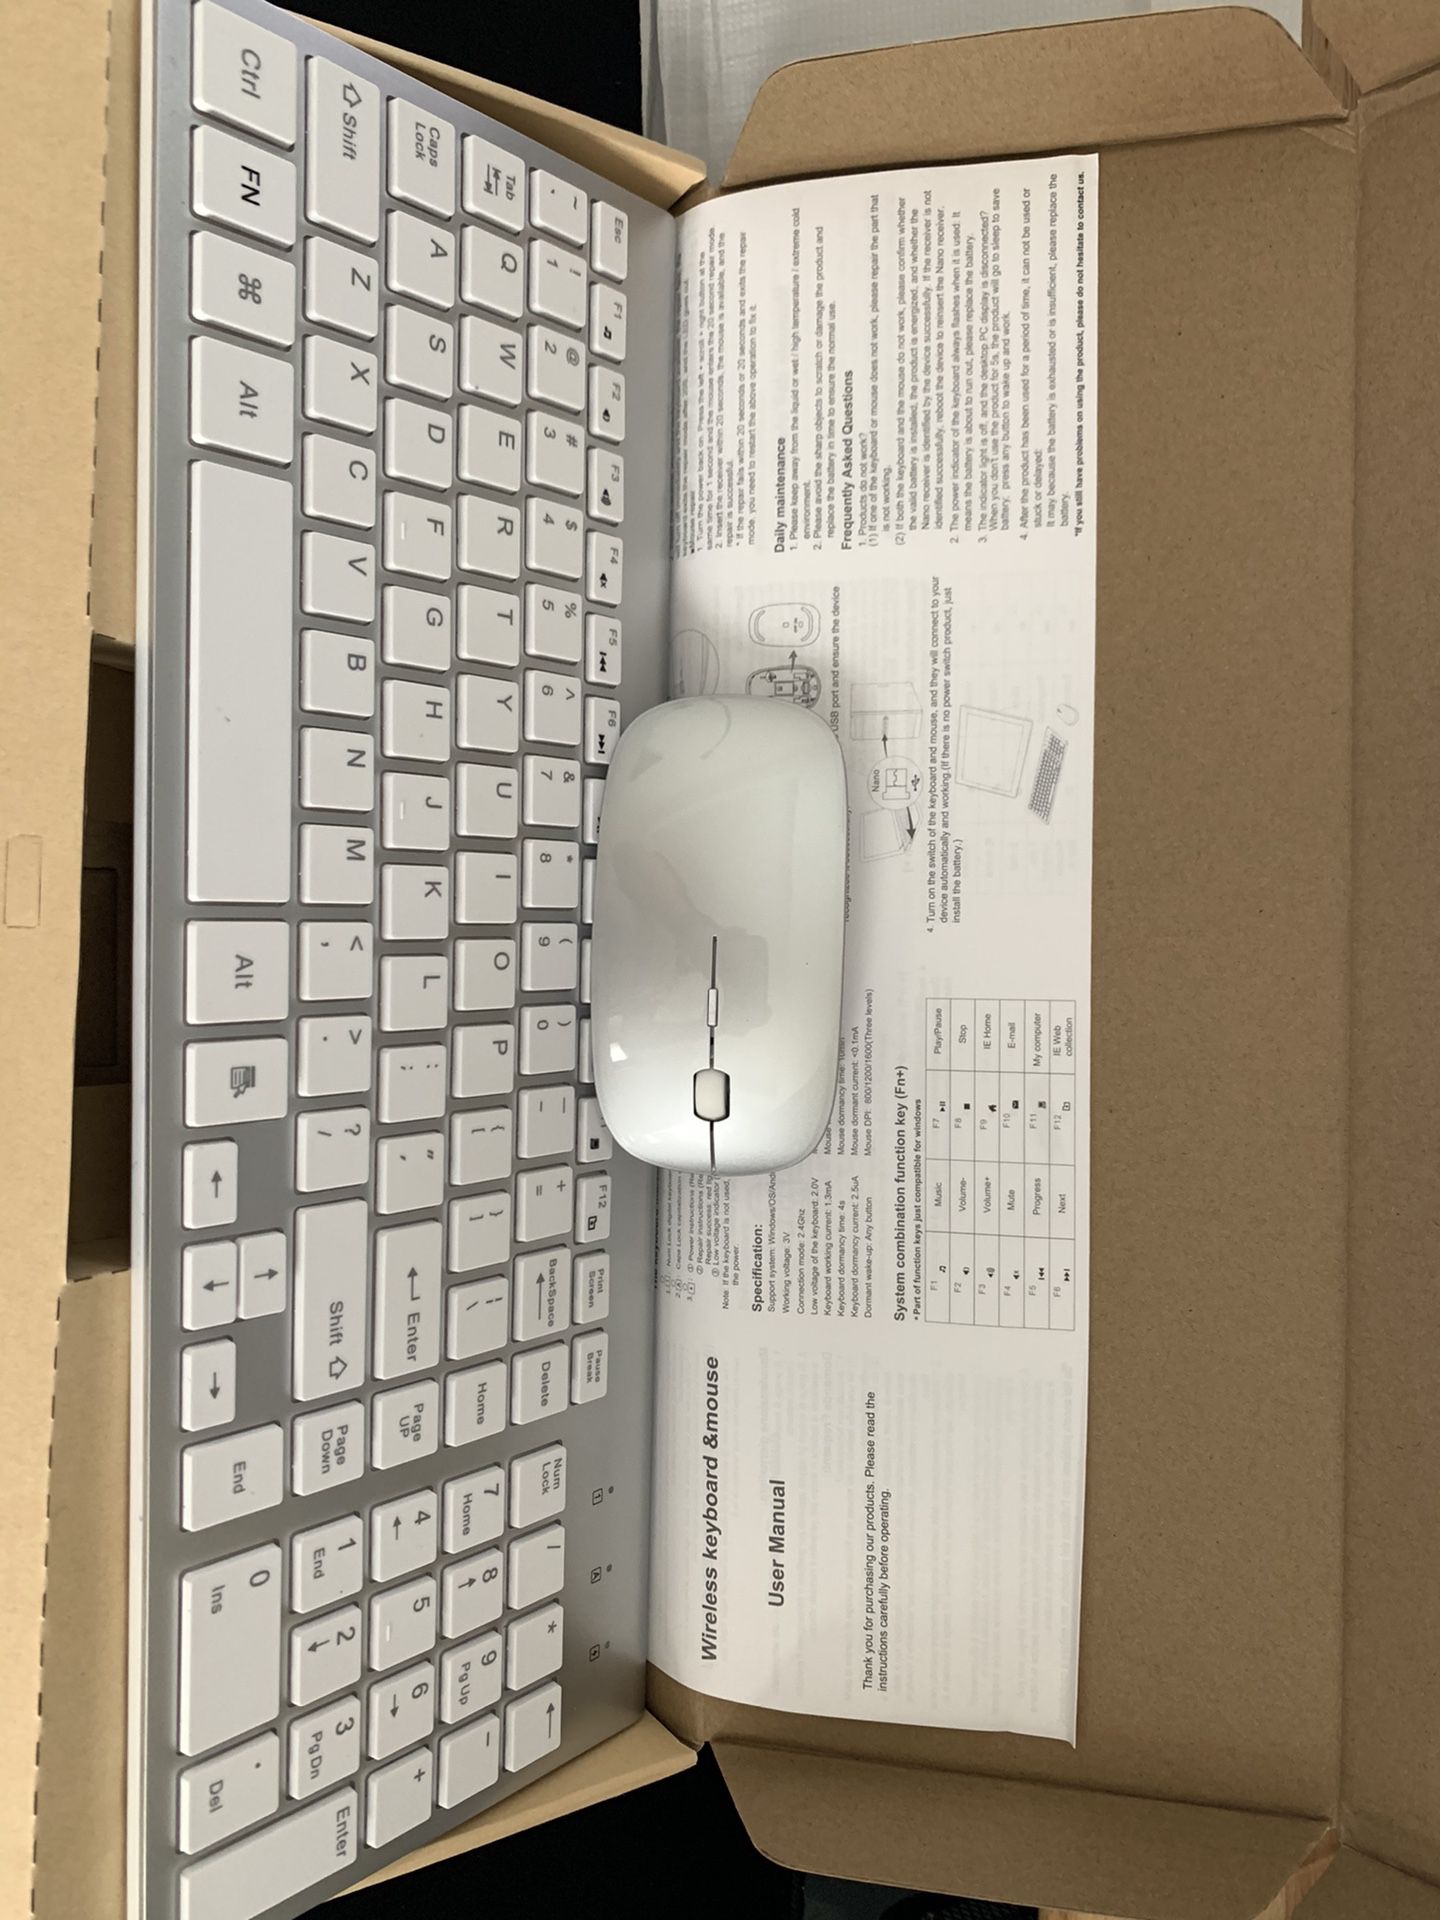 Wireless keyboard and mouse